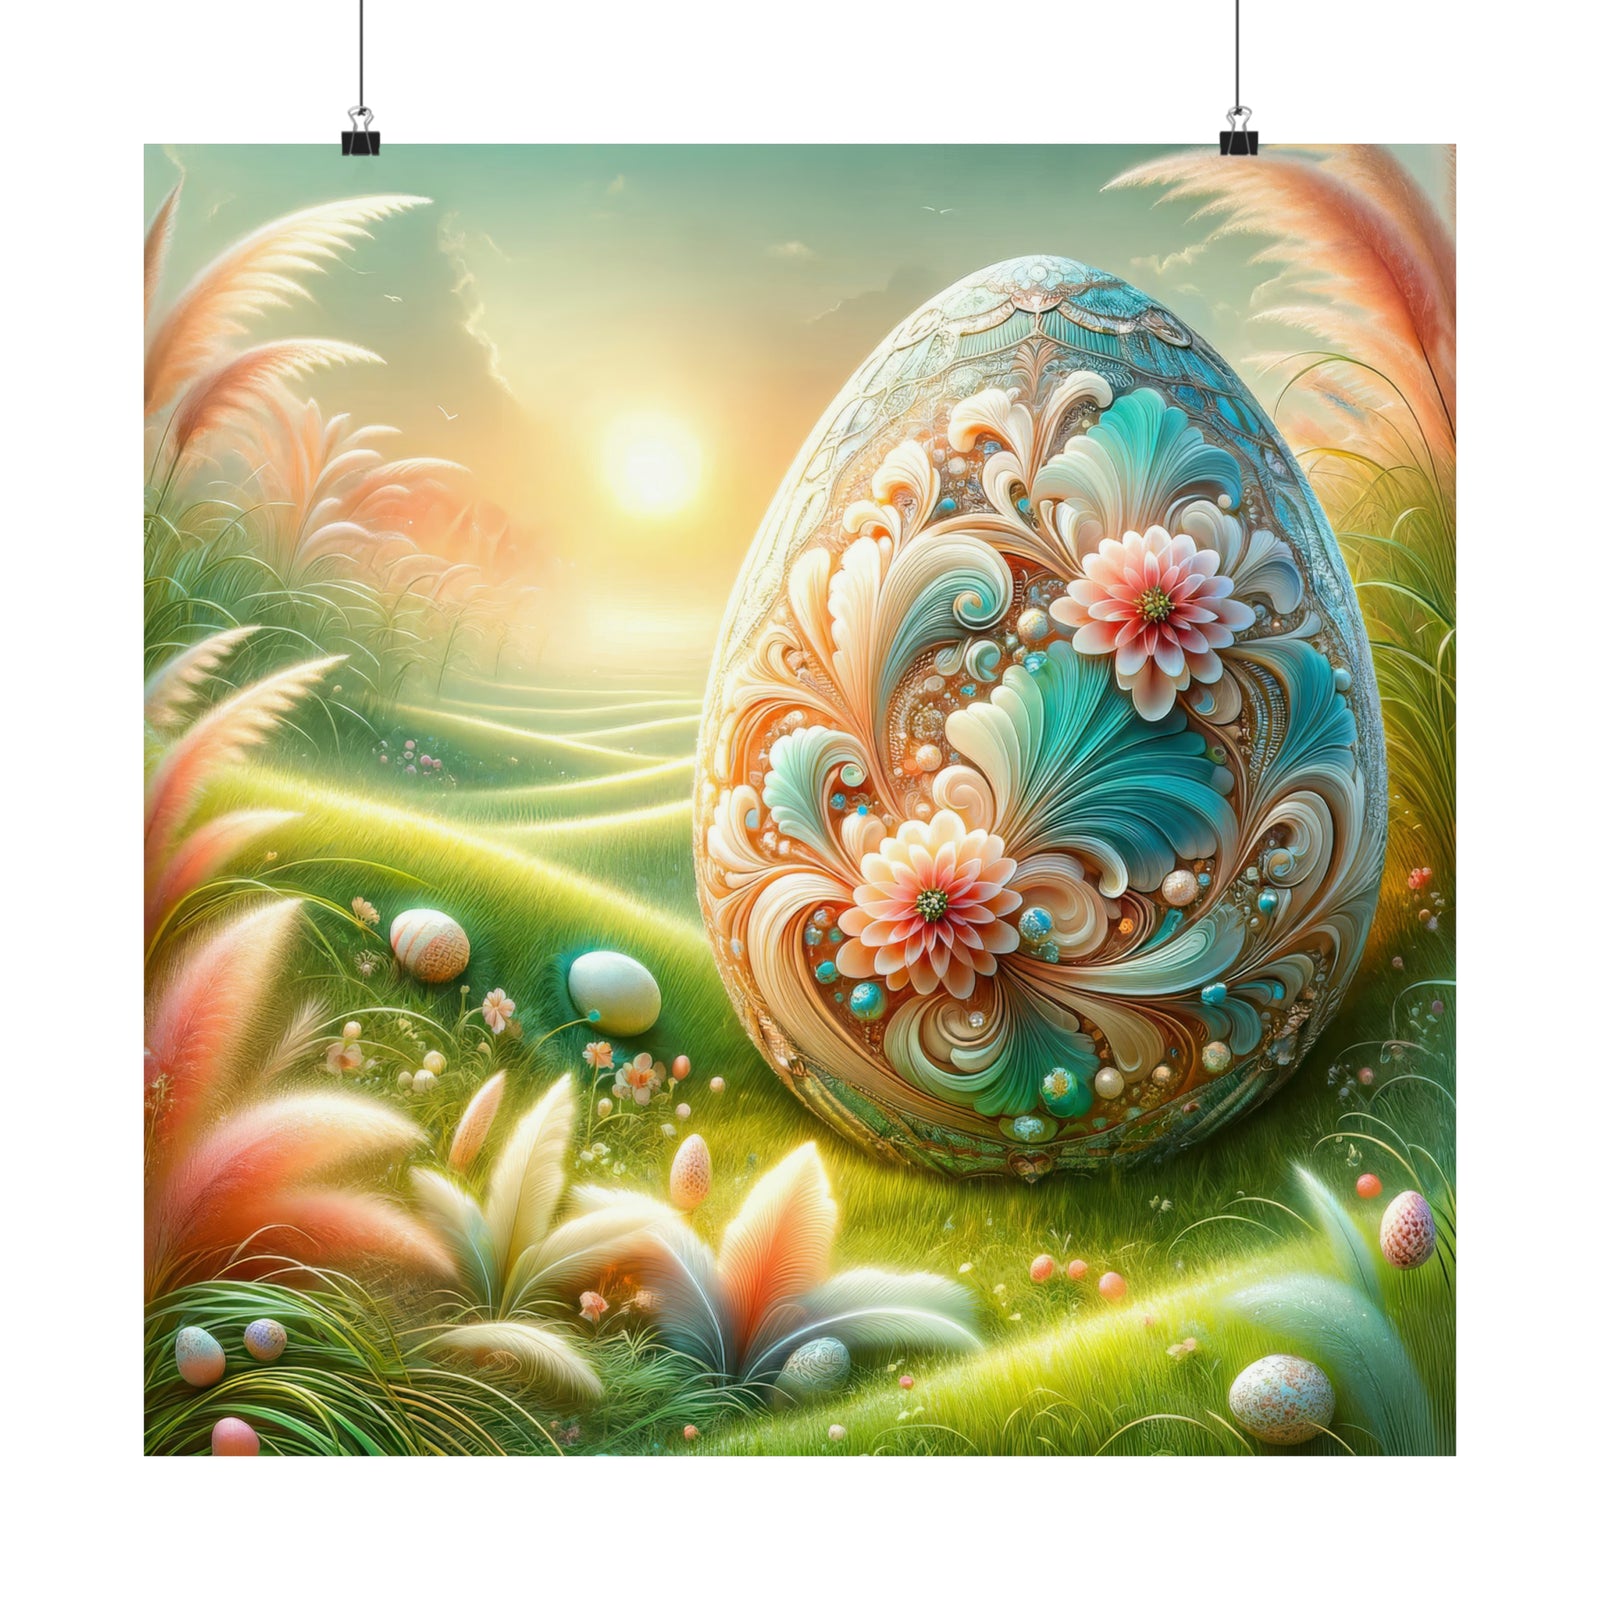 The Grand Tapestry of Spring Poster